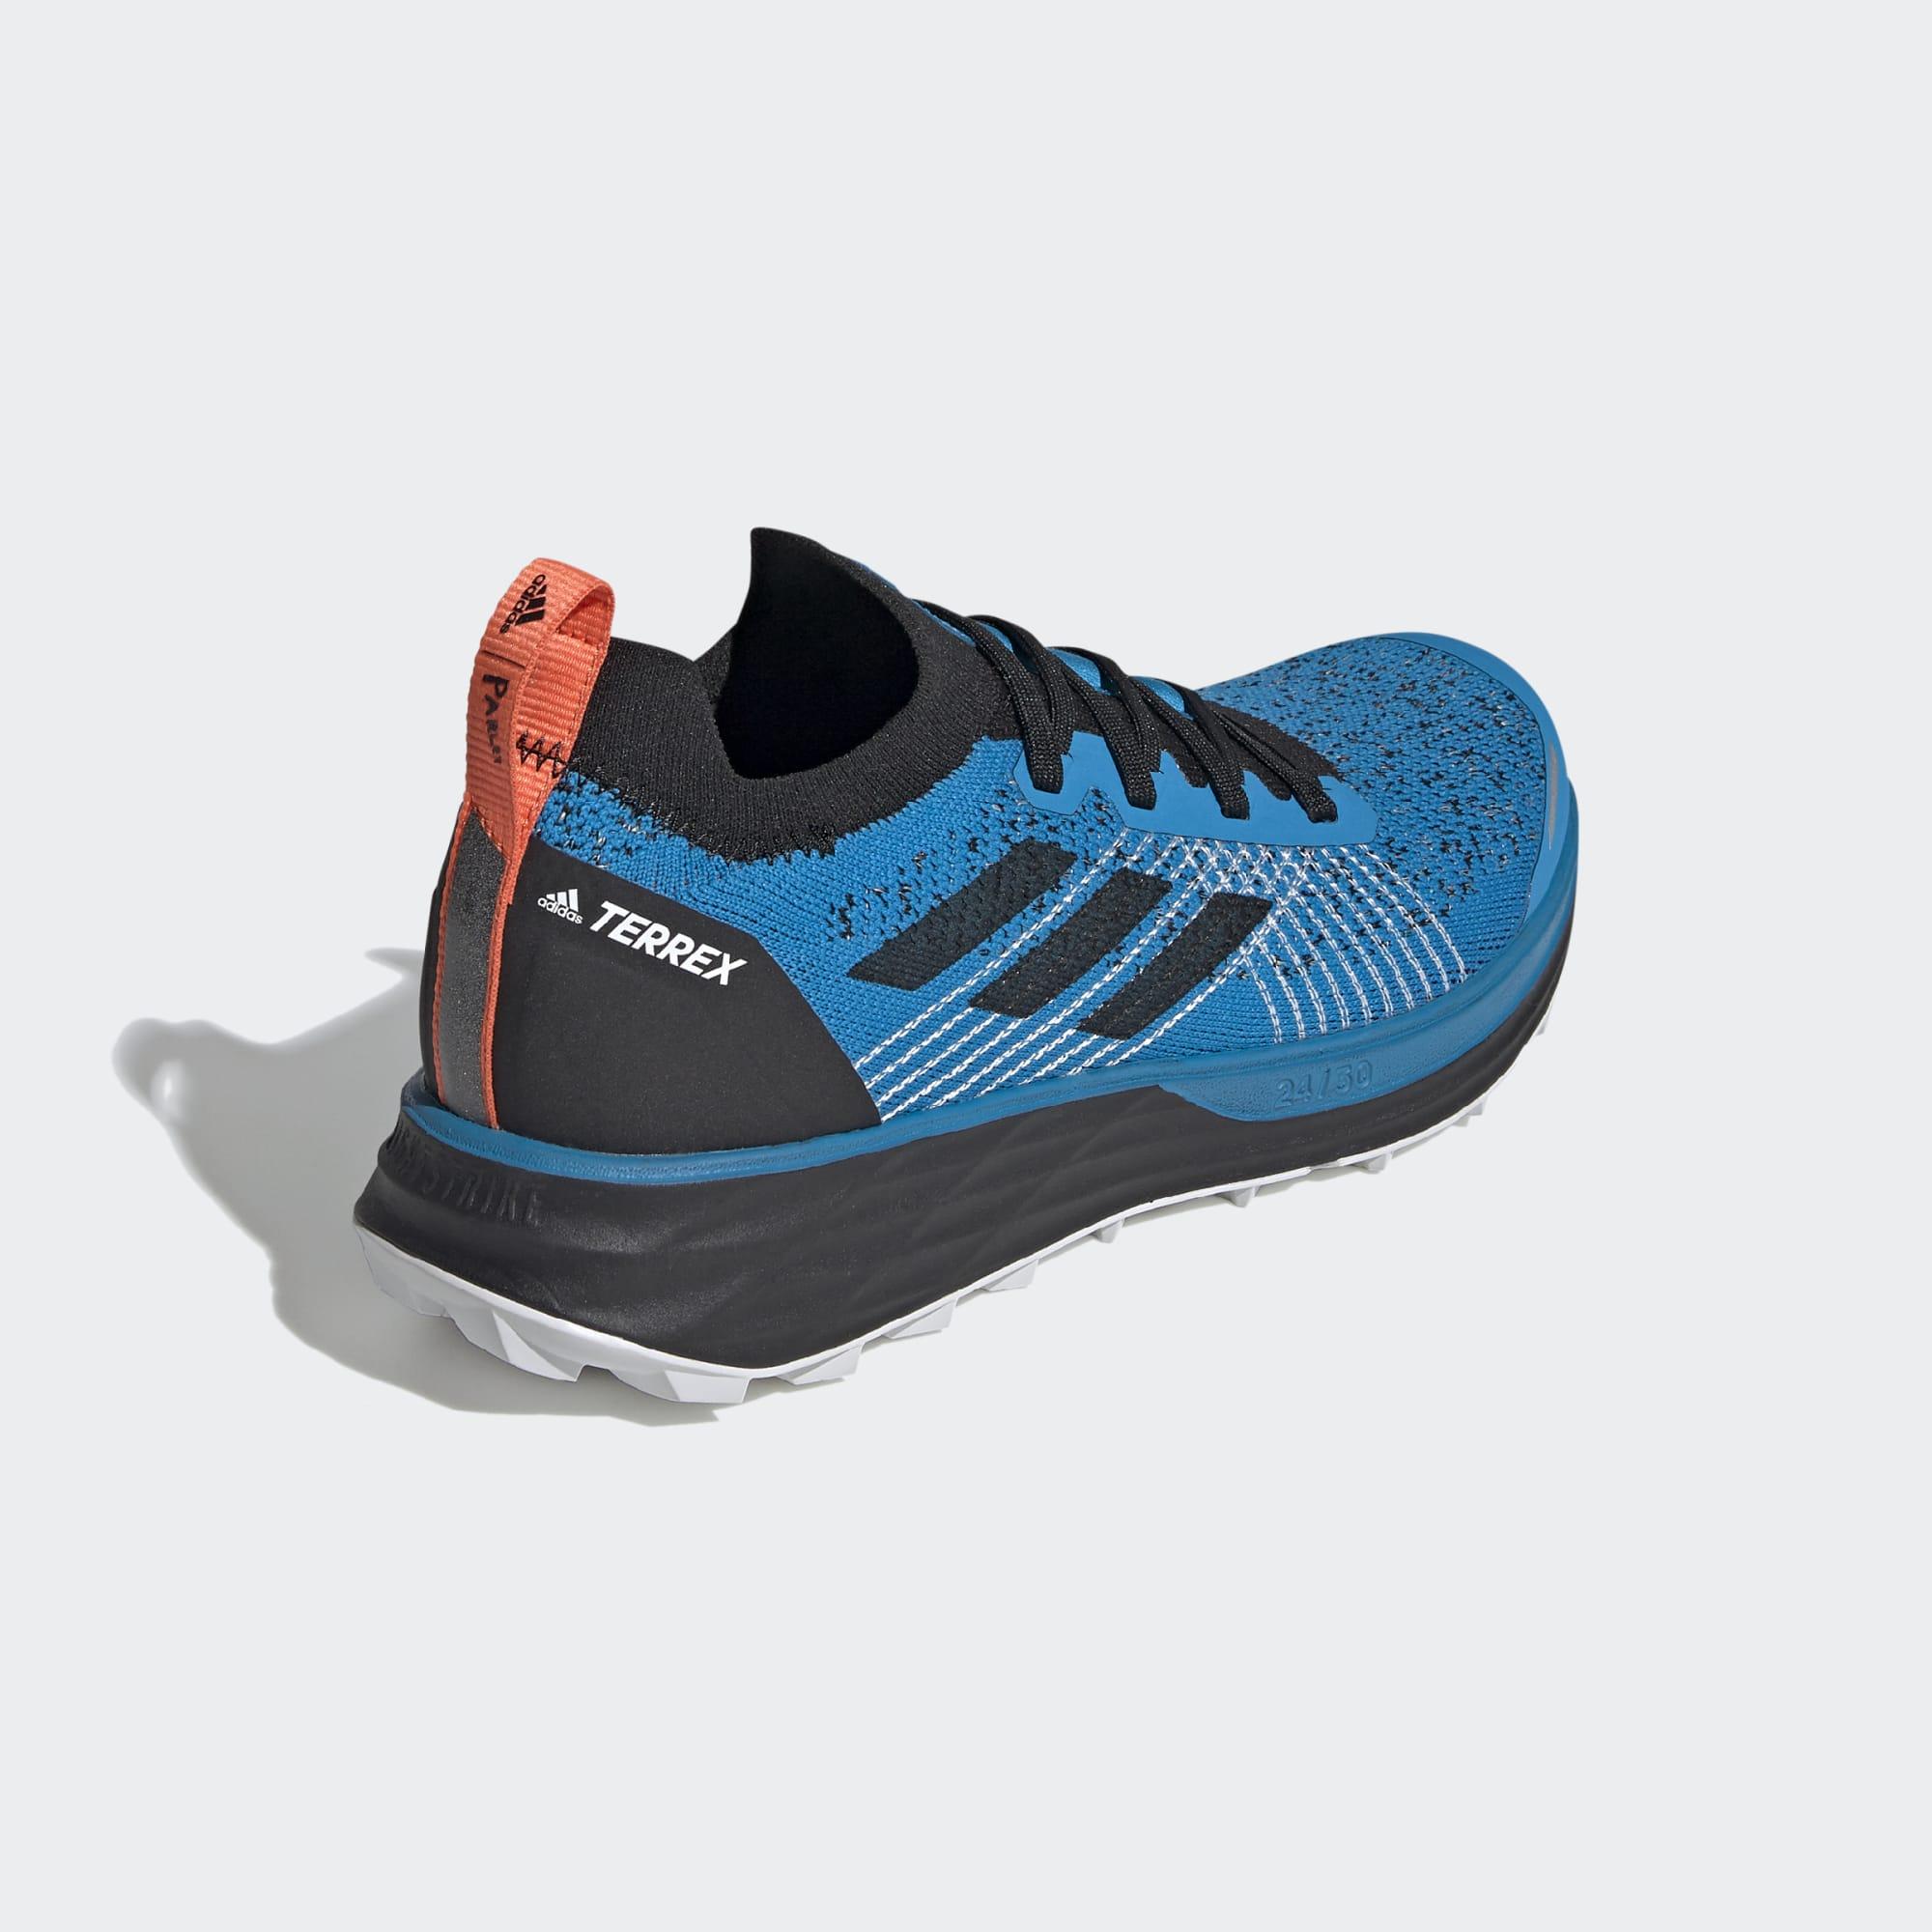 adidas Lace Terrex Two Parley Trail Running Shoes in Blue for Men - Lyst